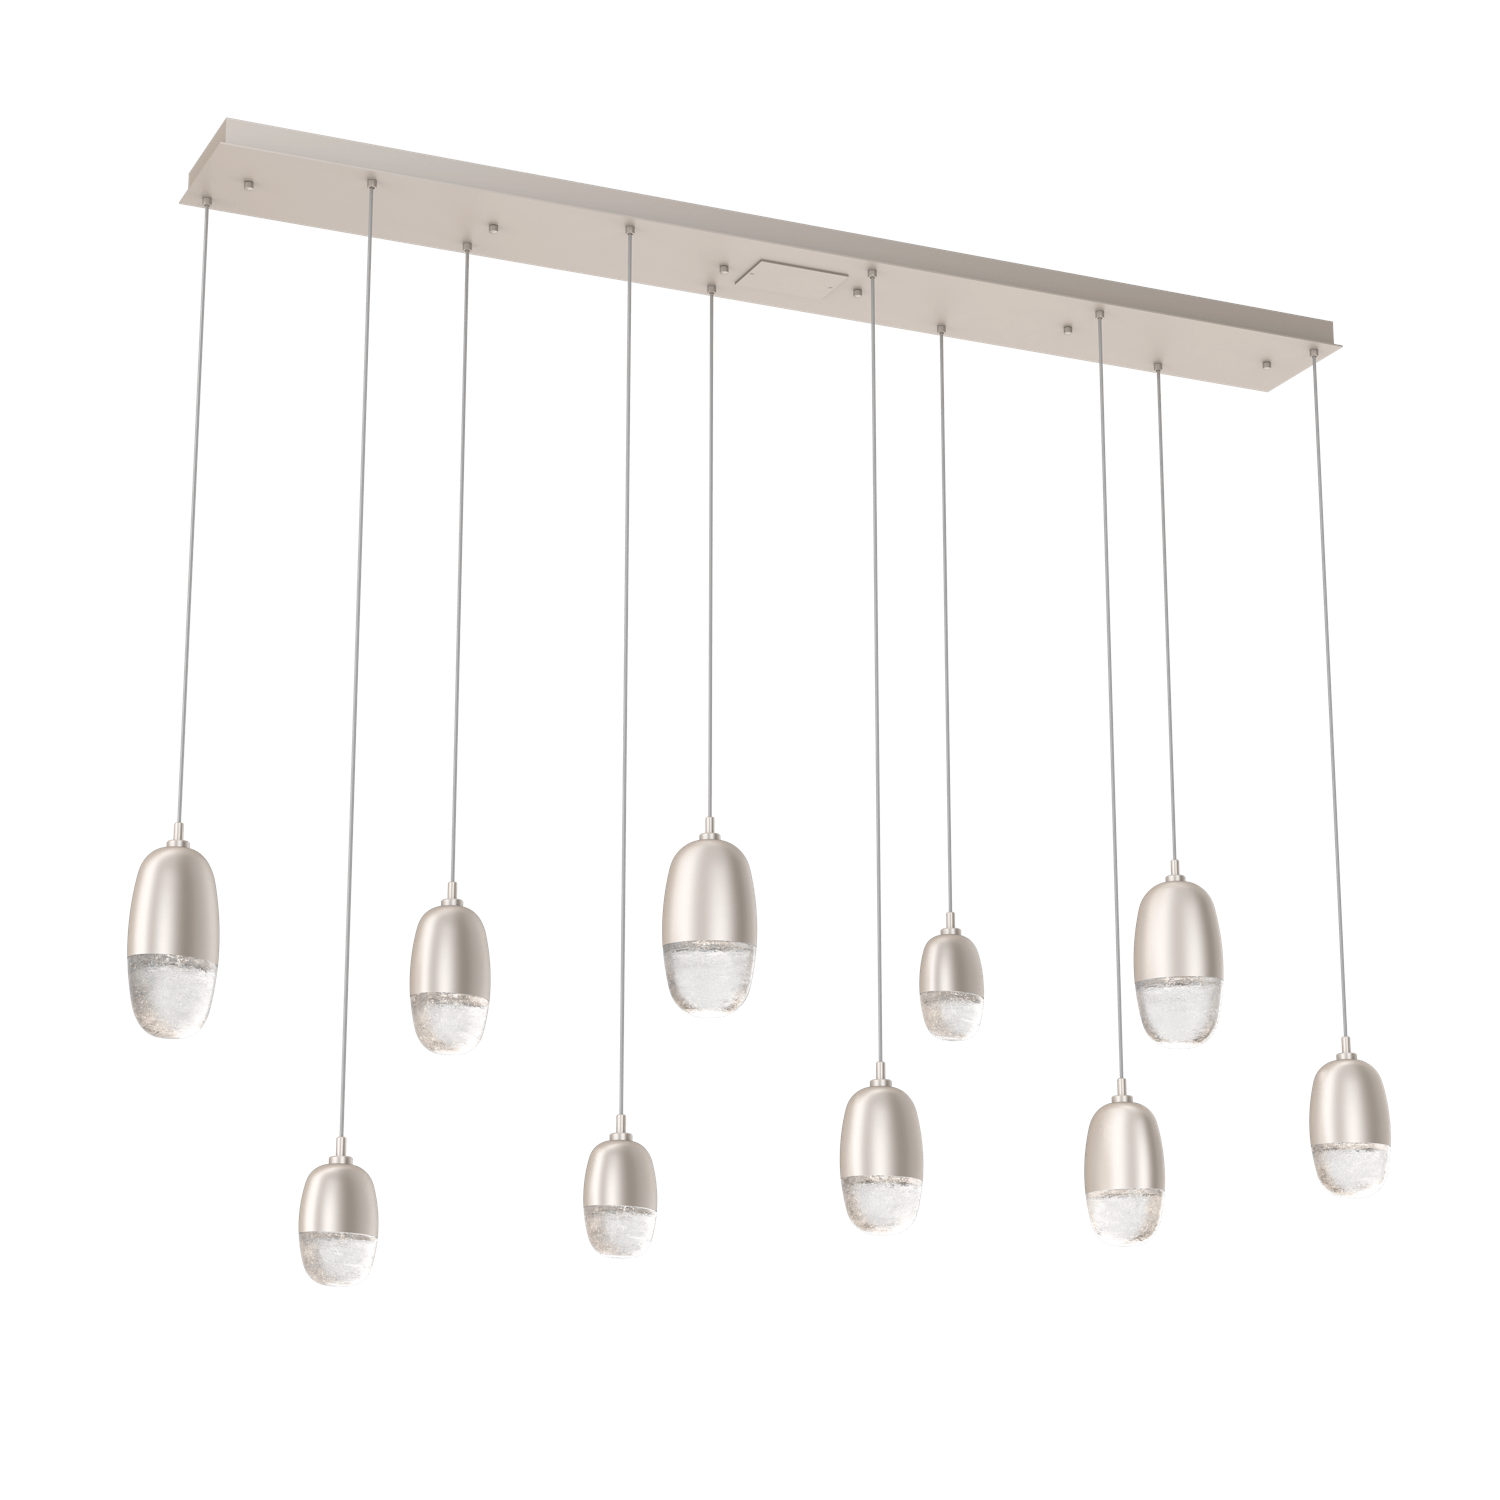 PLB0079-09-BS-Hammerton-Studio-Pebble-9-light-linear-pendant-chandelier-with-metallic-beige-silver-finish-and-clear-cast-glass-shades-and-LED-lamping